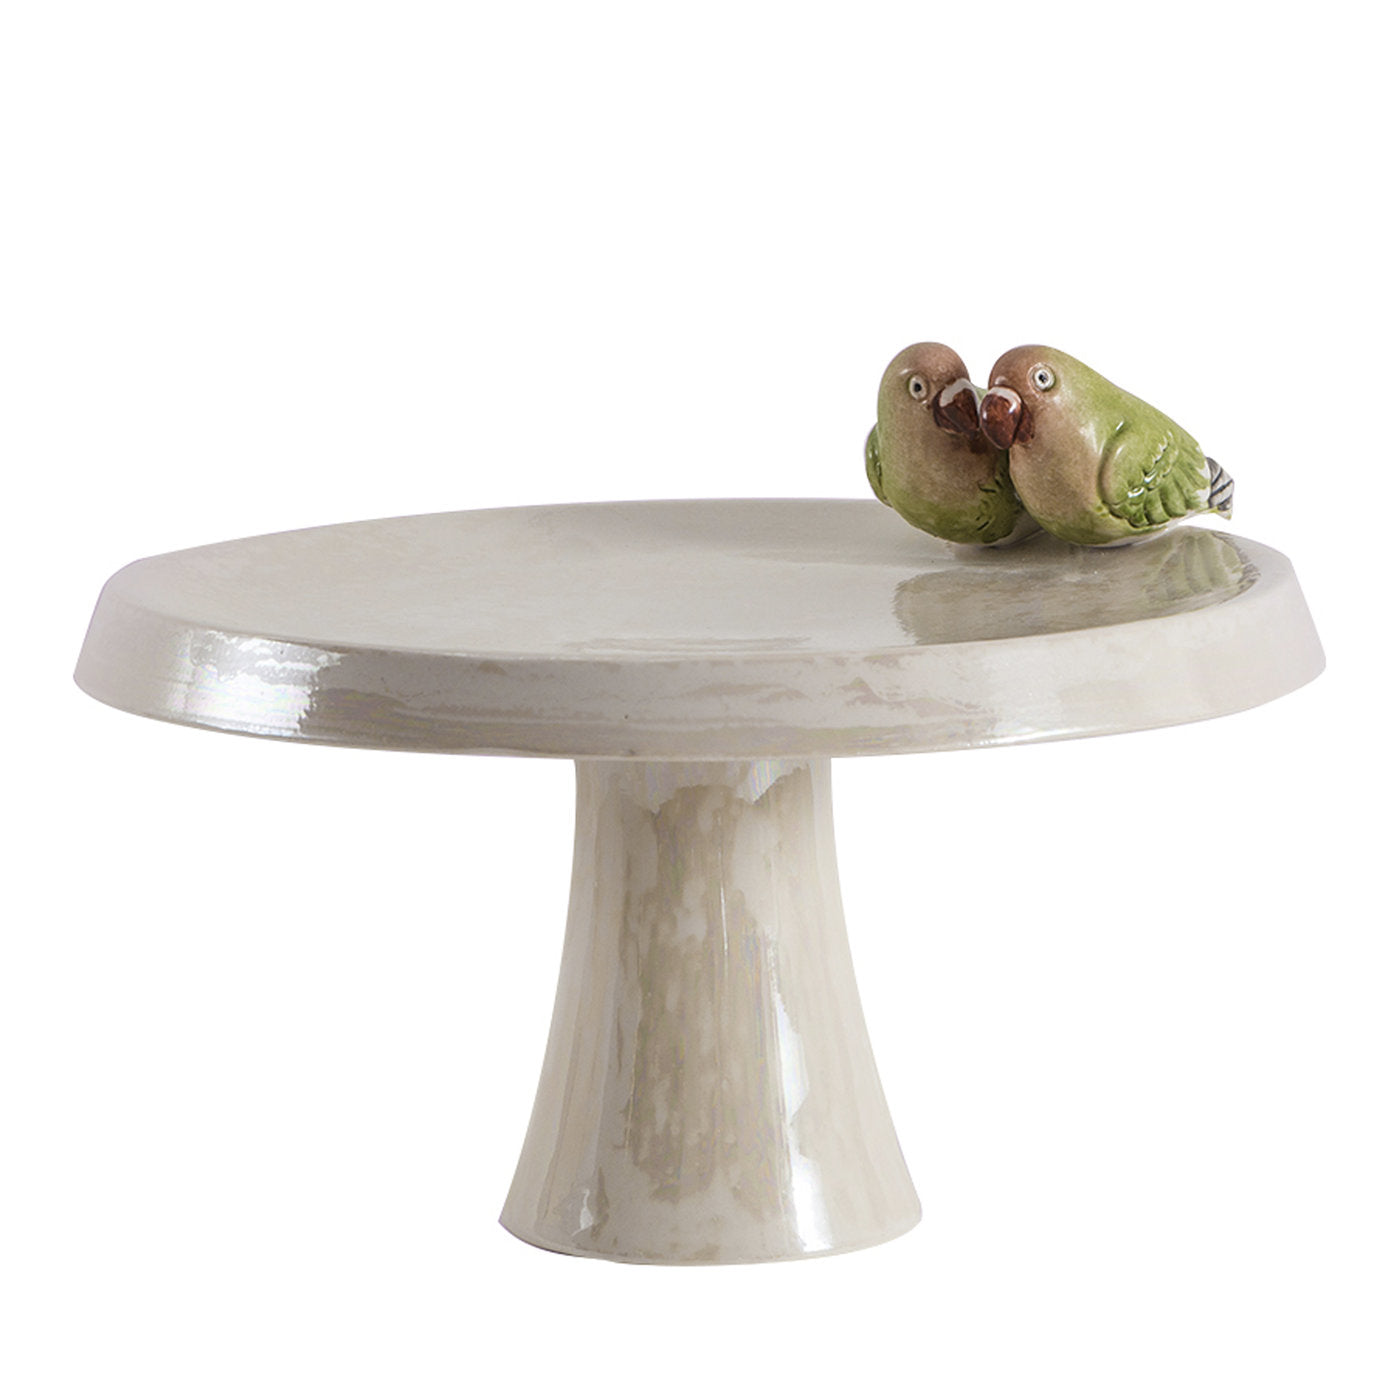 Esotica Collection Inseparabili Porcelain Cake Stand